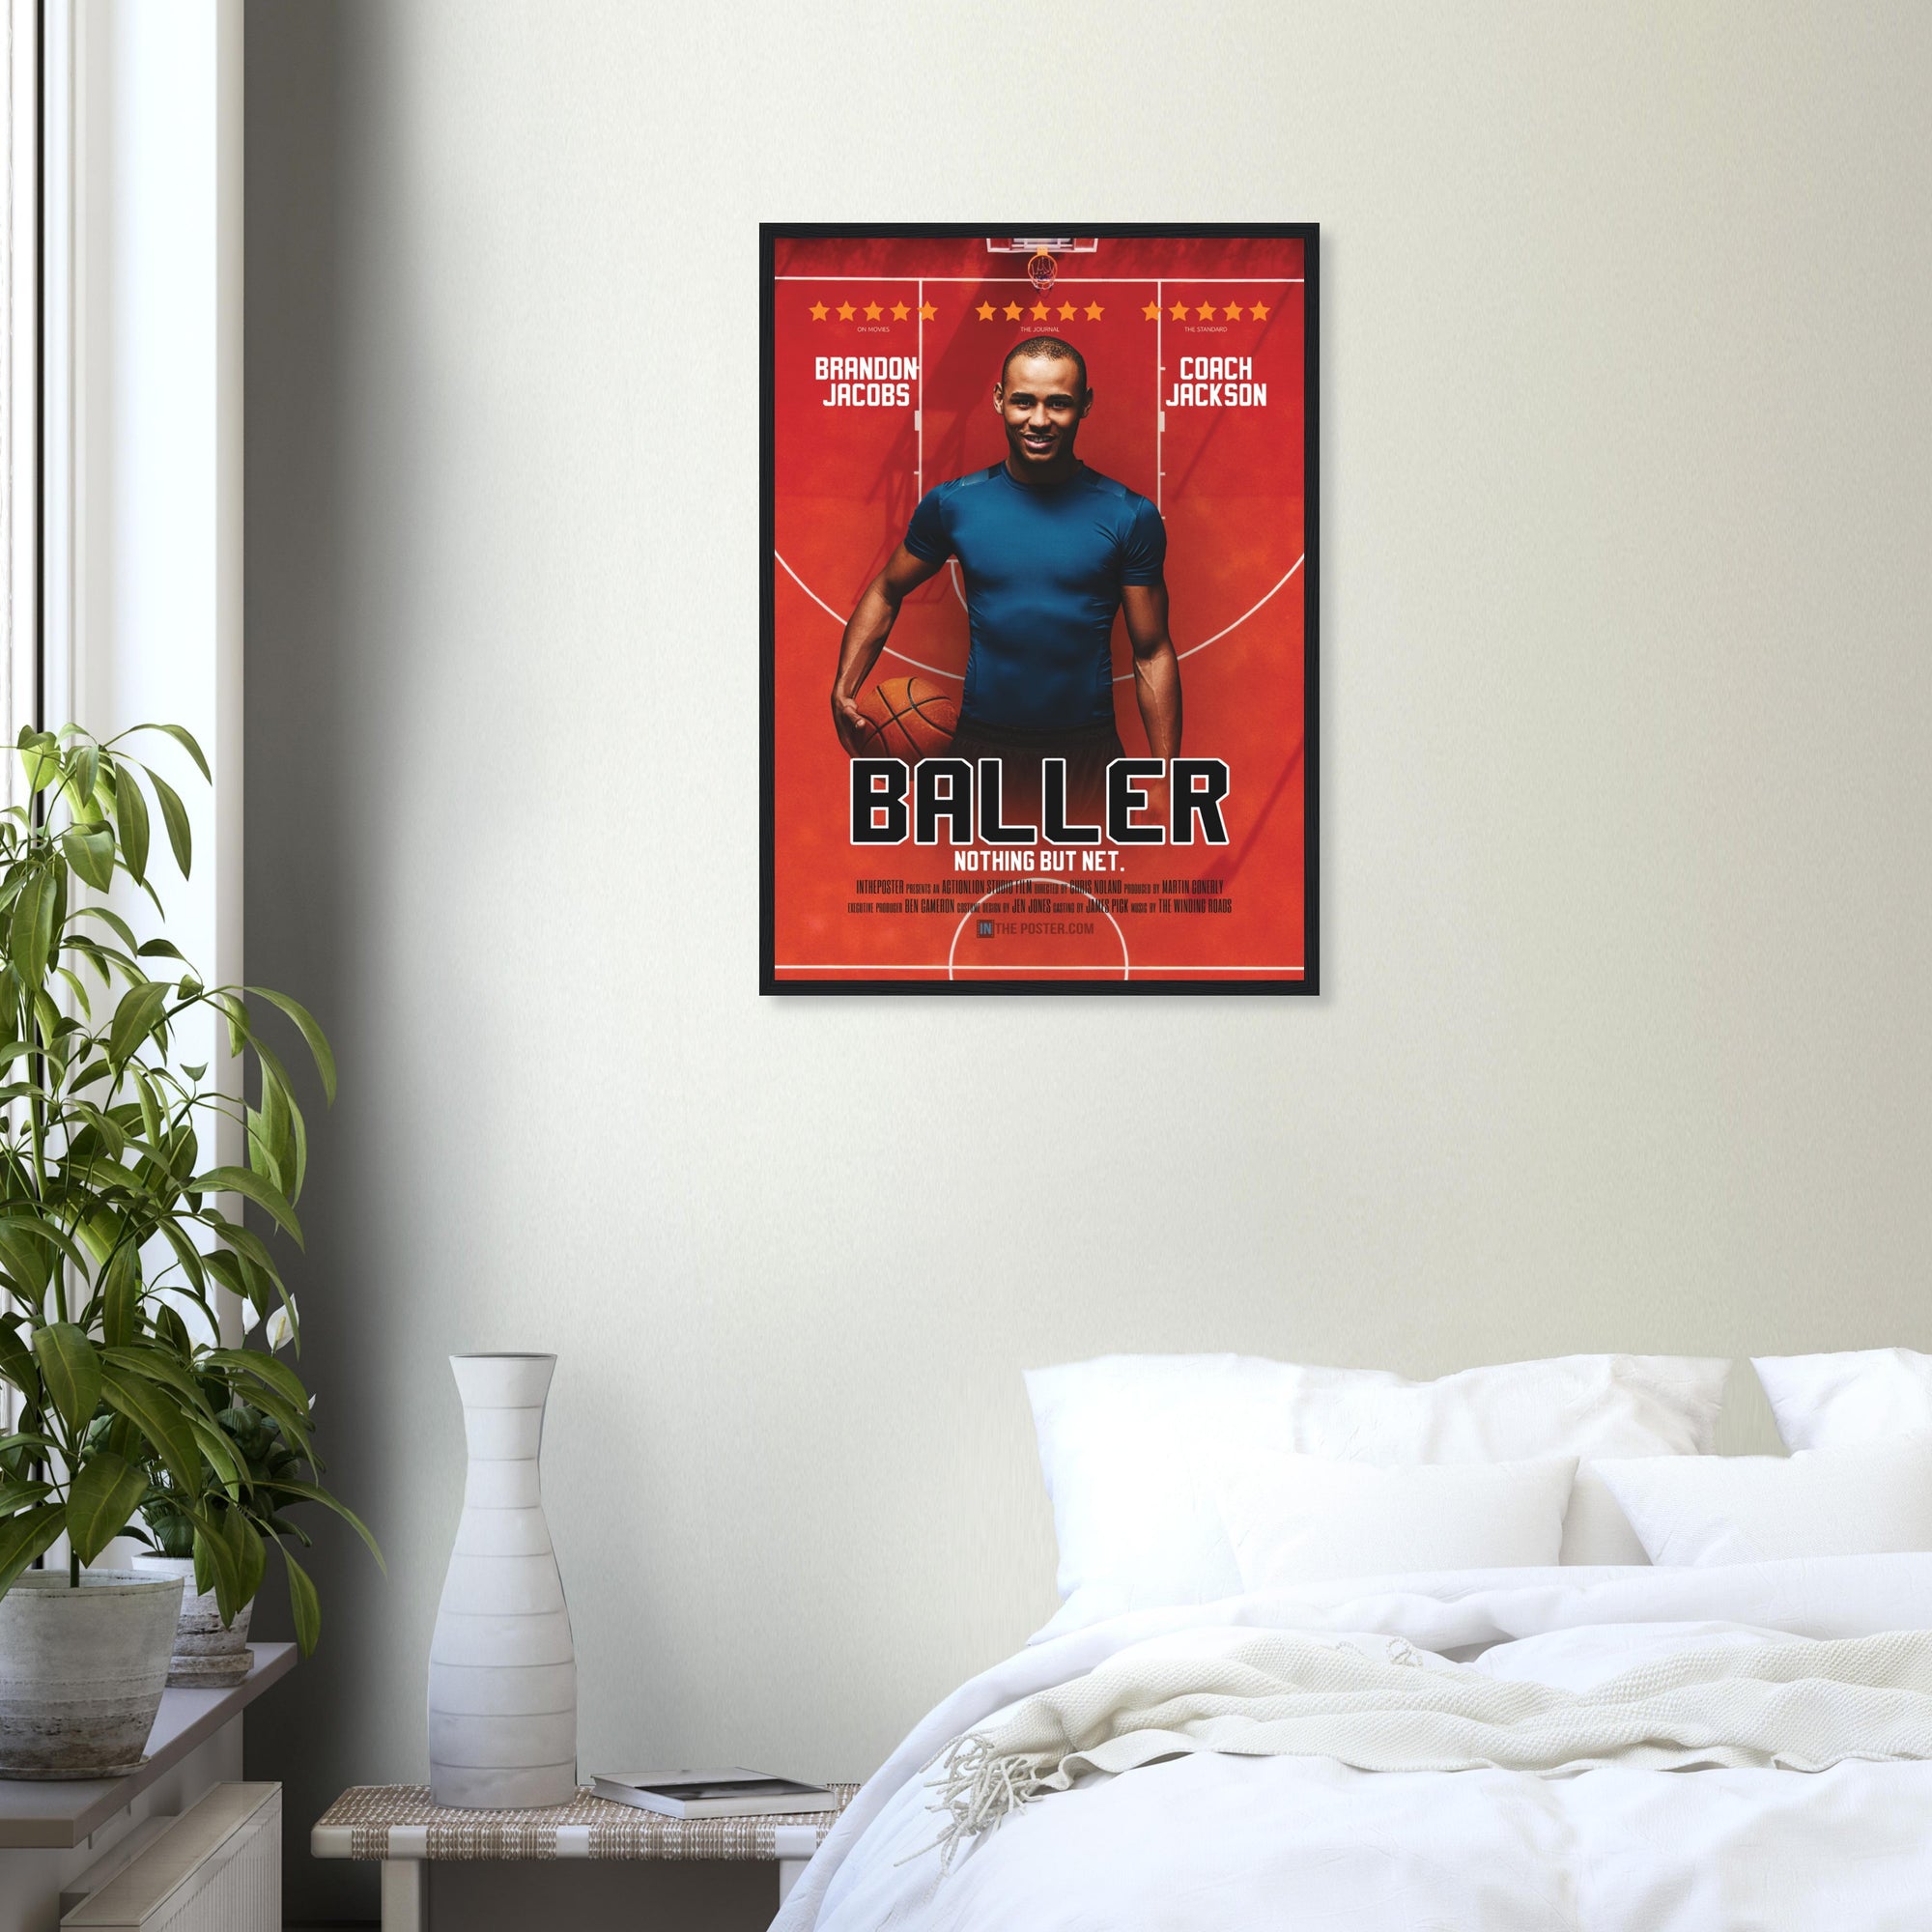 A custom basketball movie poster in a regular black frame on a grey wall above a white bed and plant